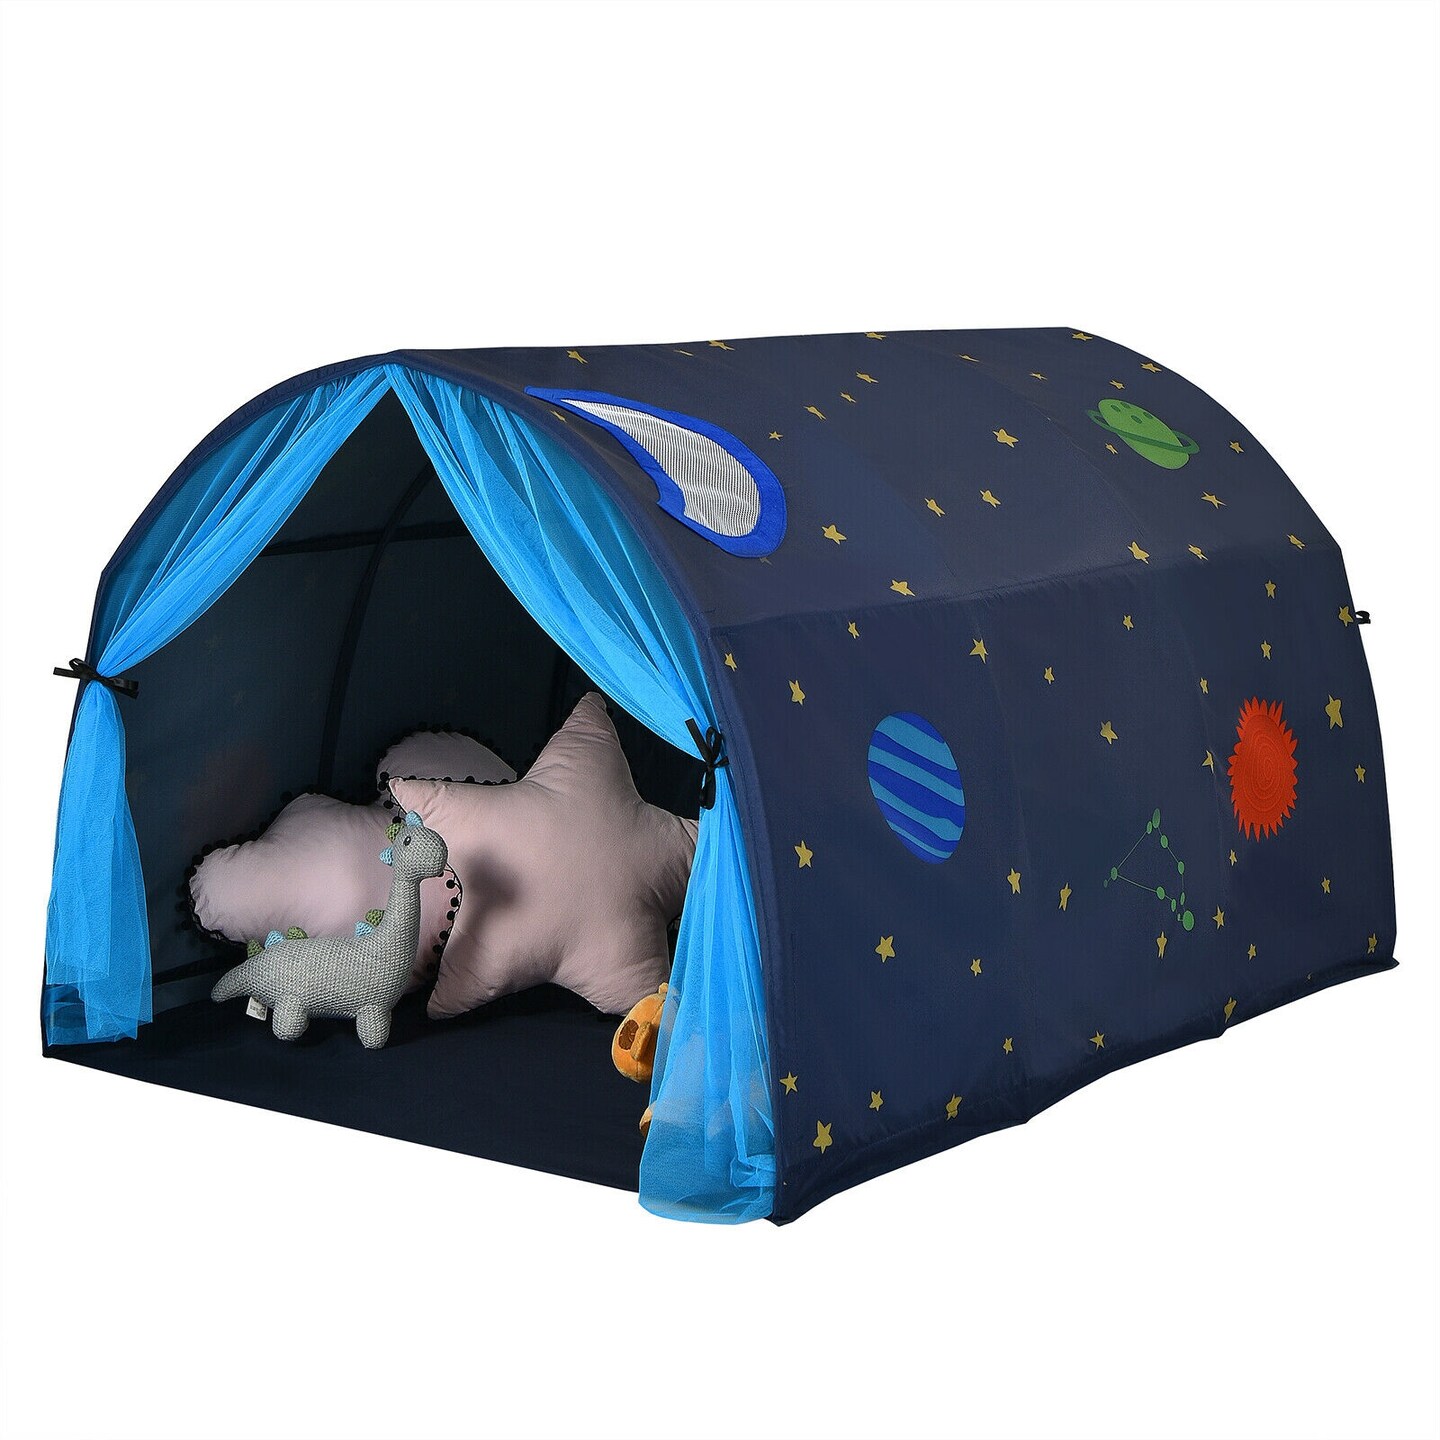 Kids Galaxy Starry Sky Dream Portable Play Tent with Double Net Curtain-Purple